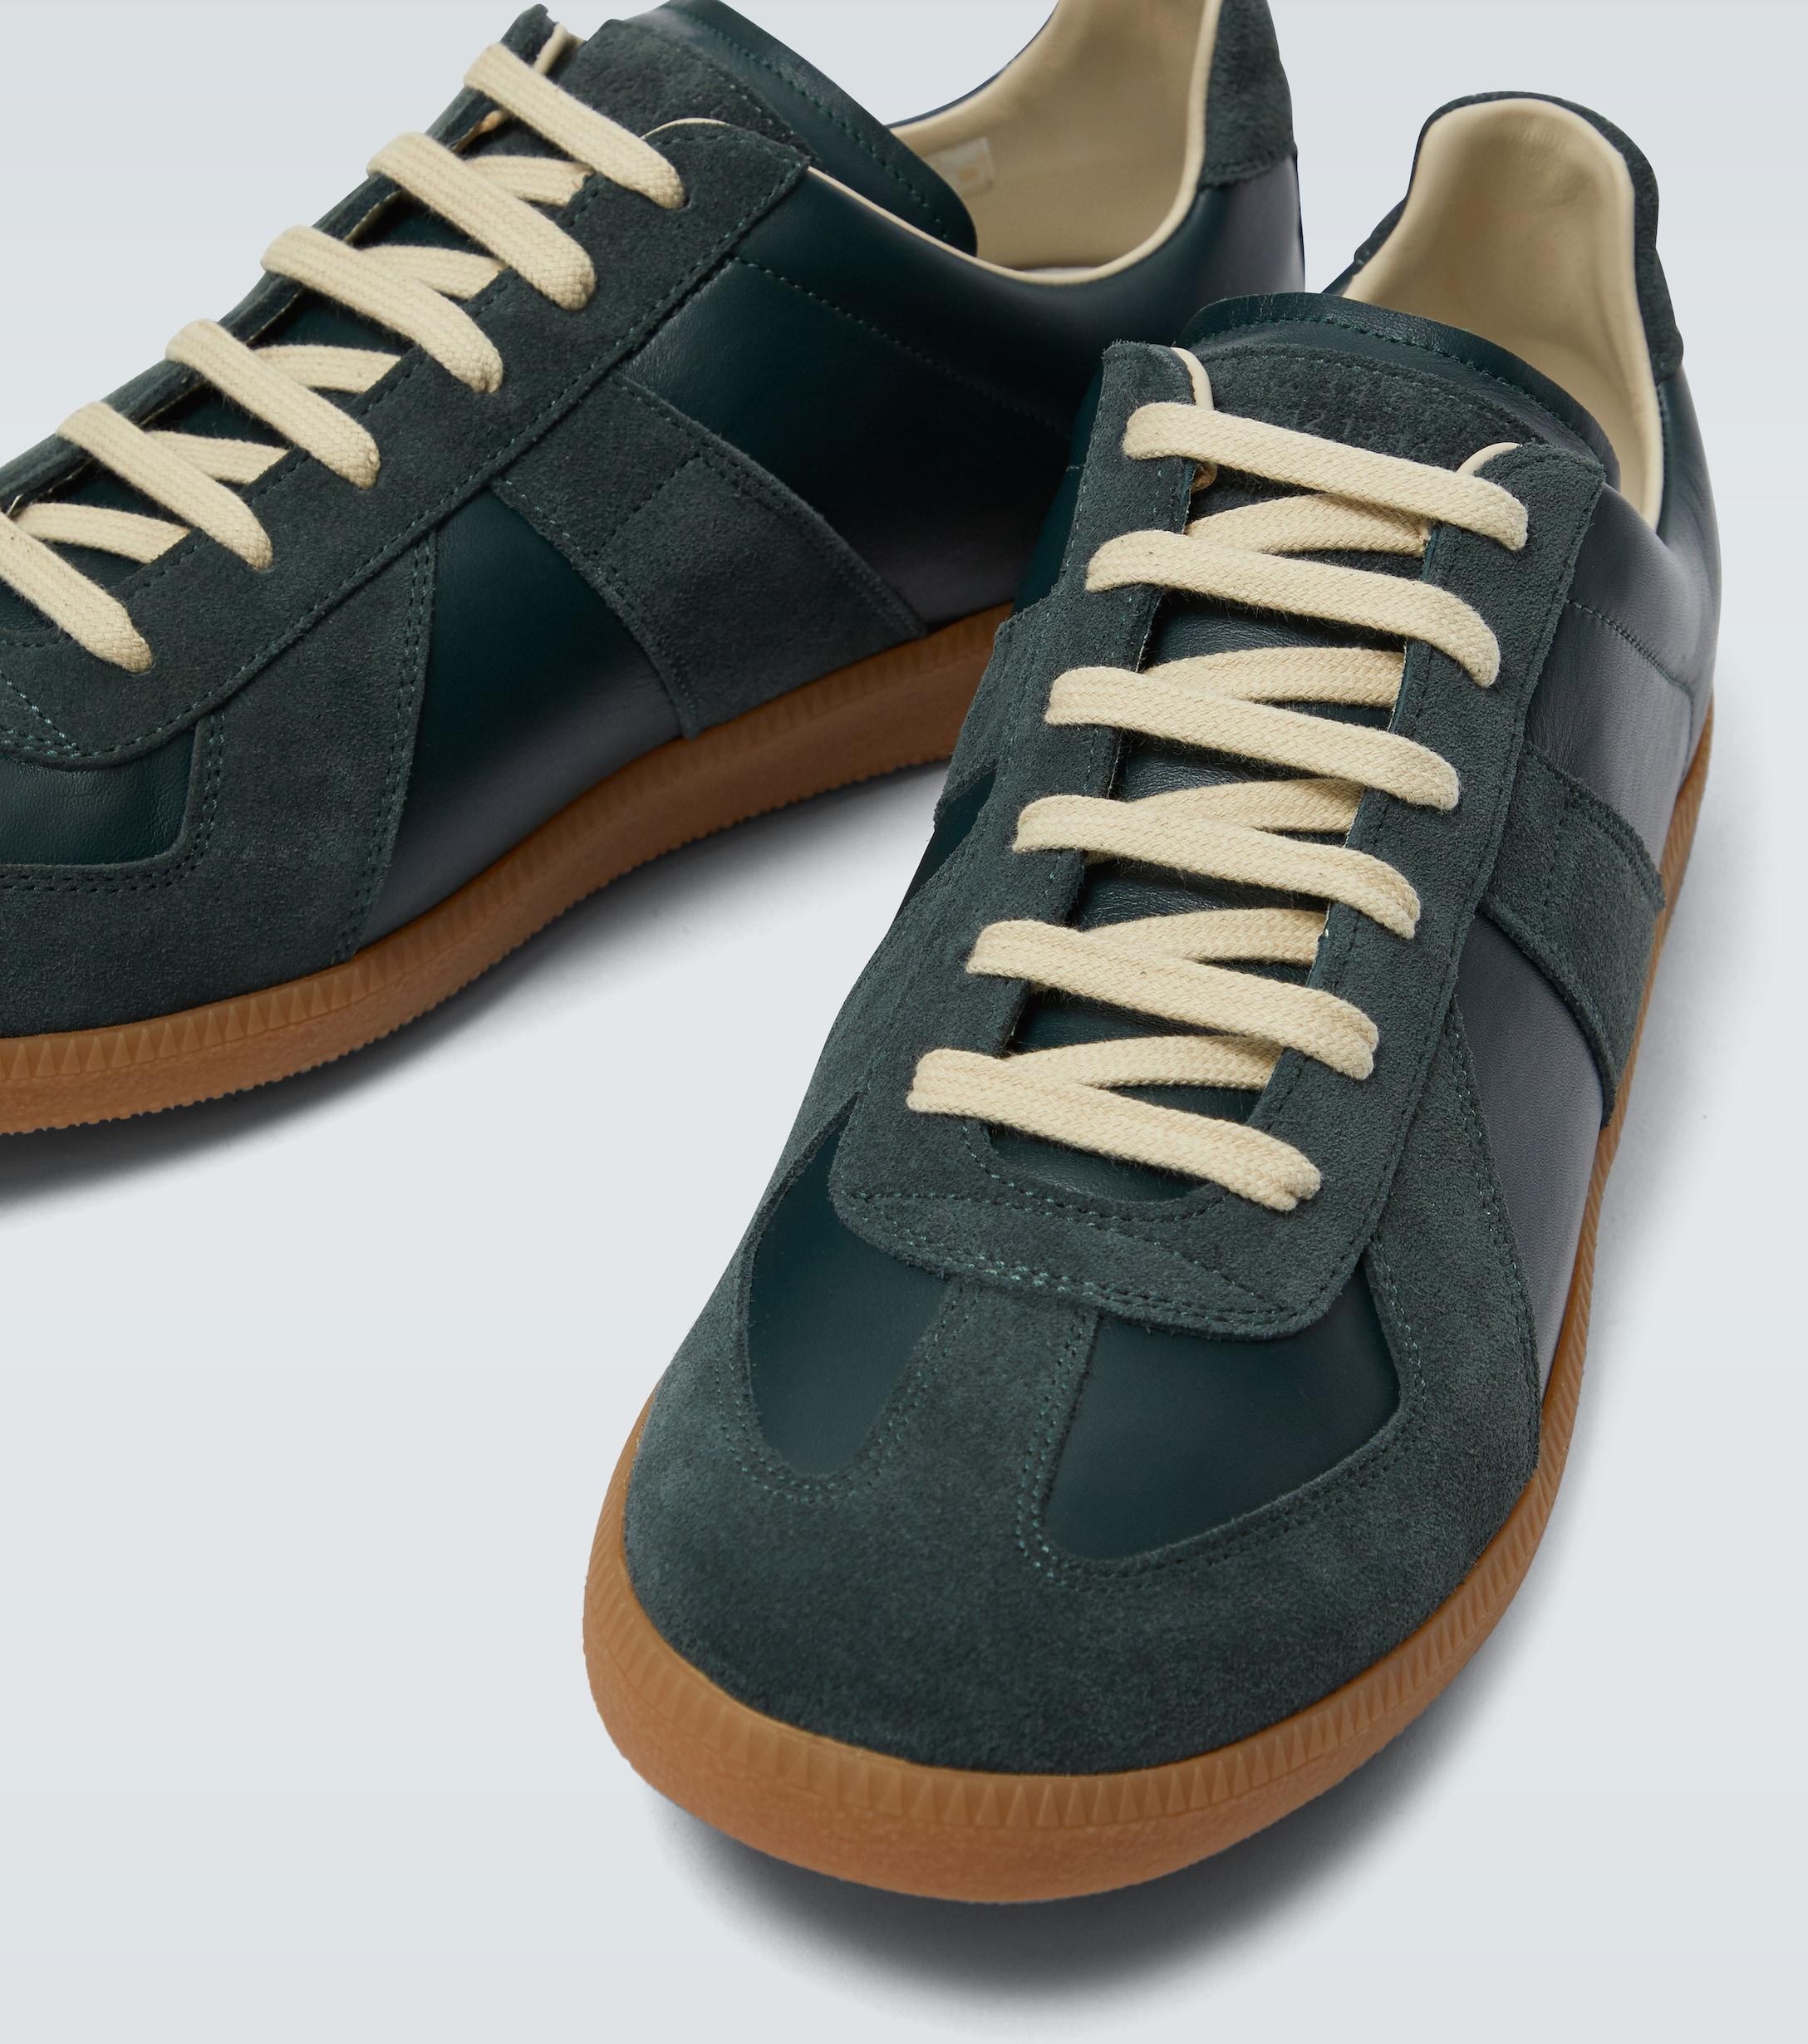 Maison Margiela Replica Leather And Suede Sneakers in Green - Lyst